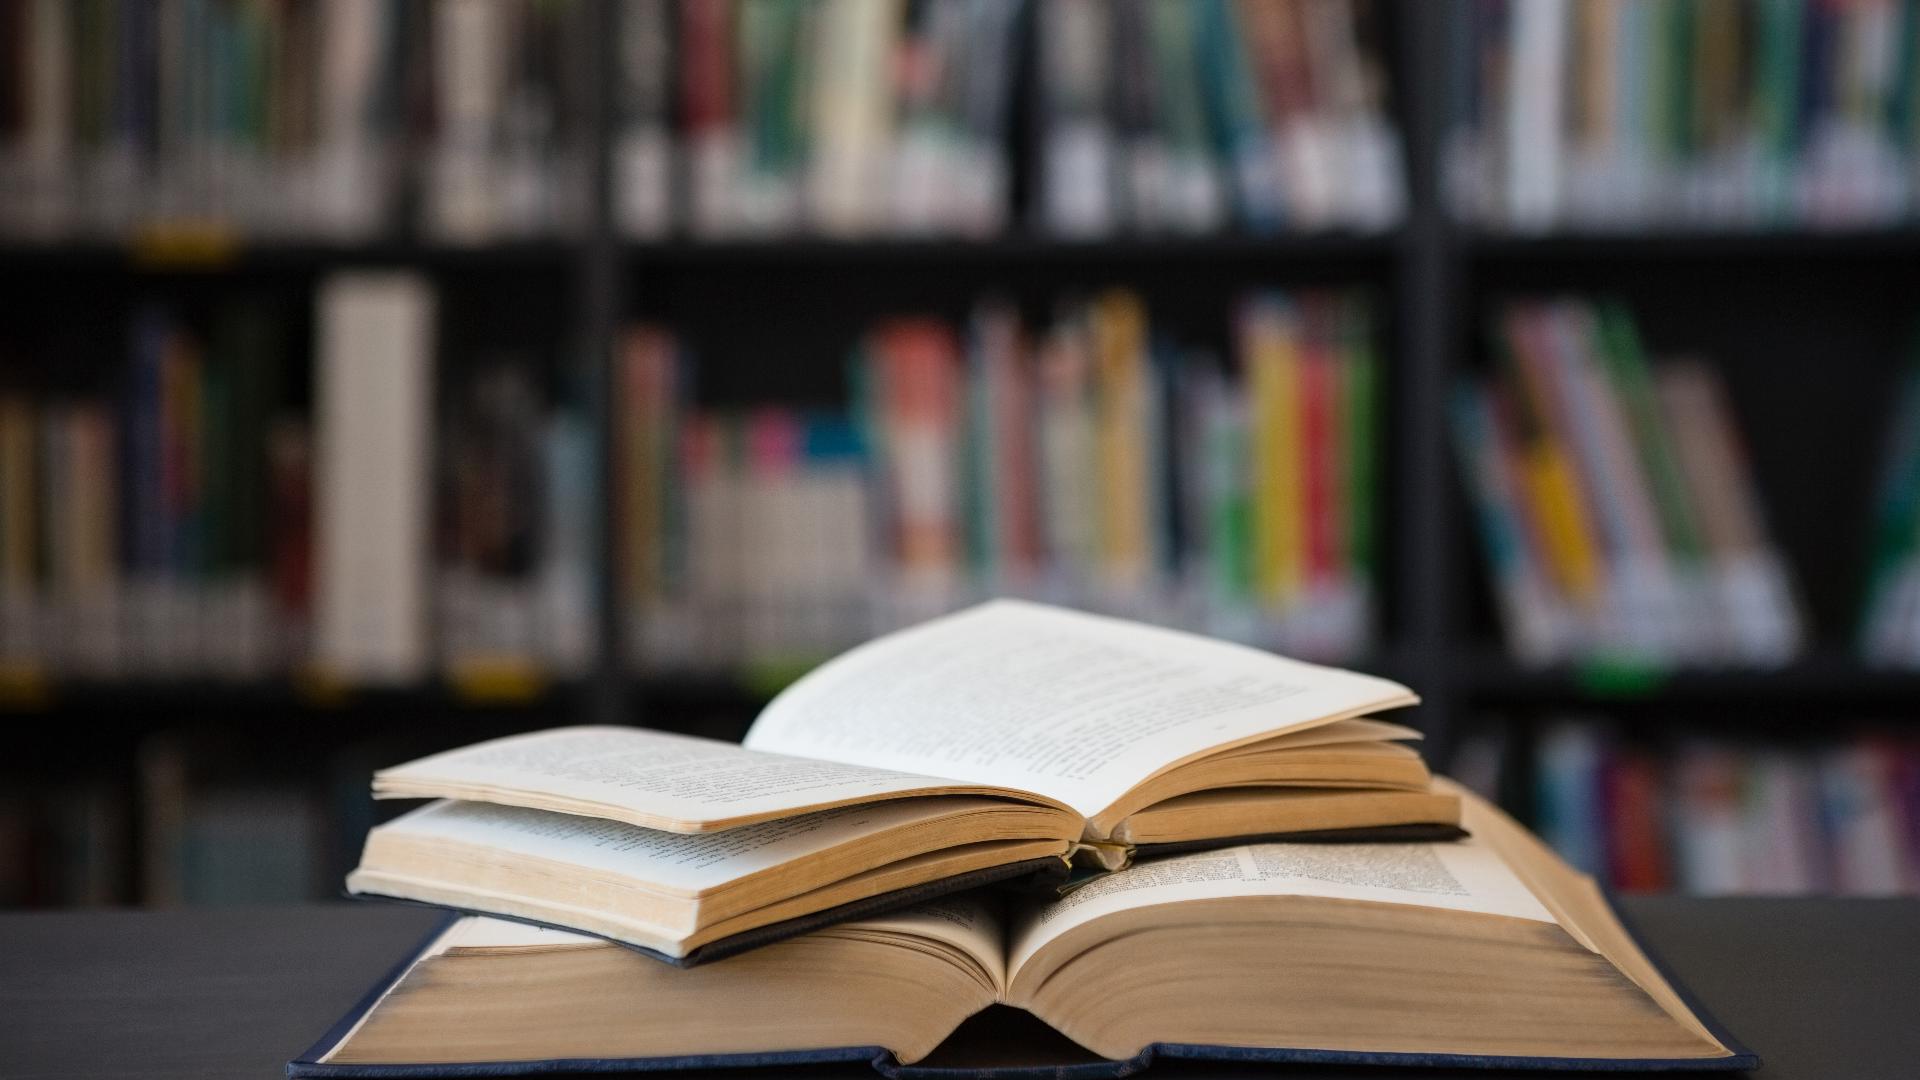 MI Right to Read, a six-month campaign, is one that the MLA says aims to inform community members and educate on how to push back against book restrictions.